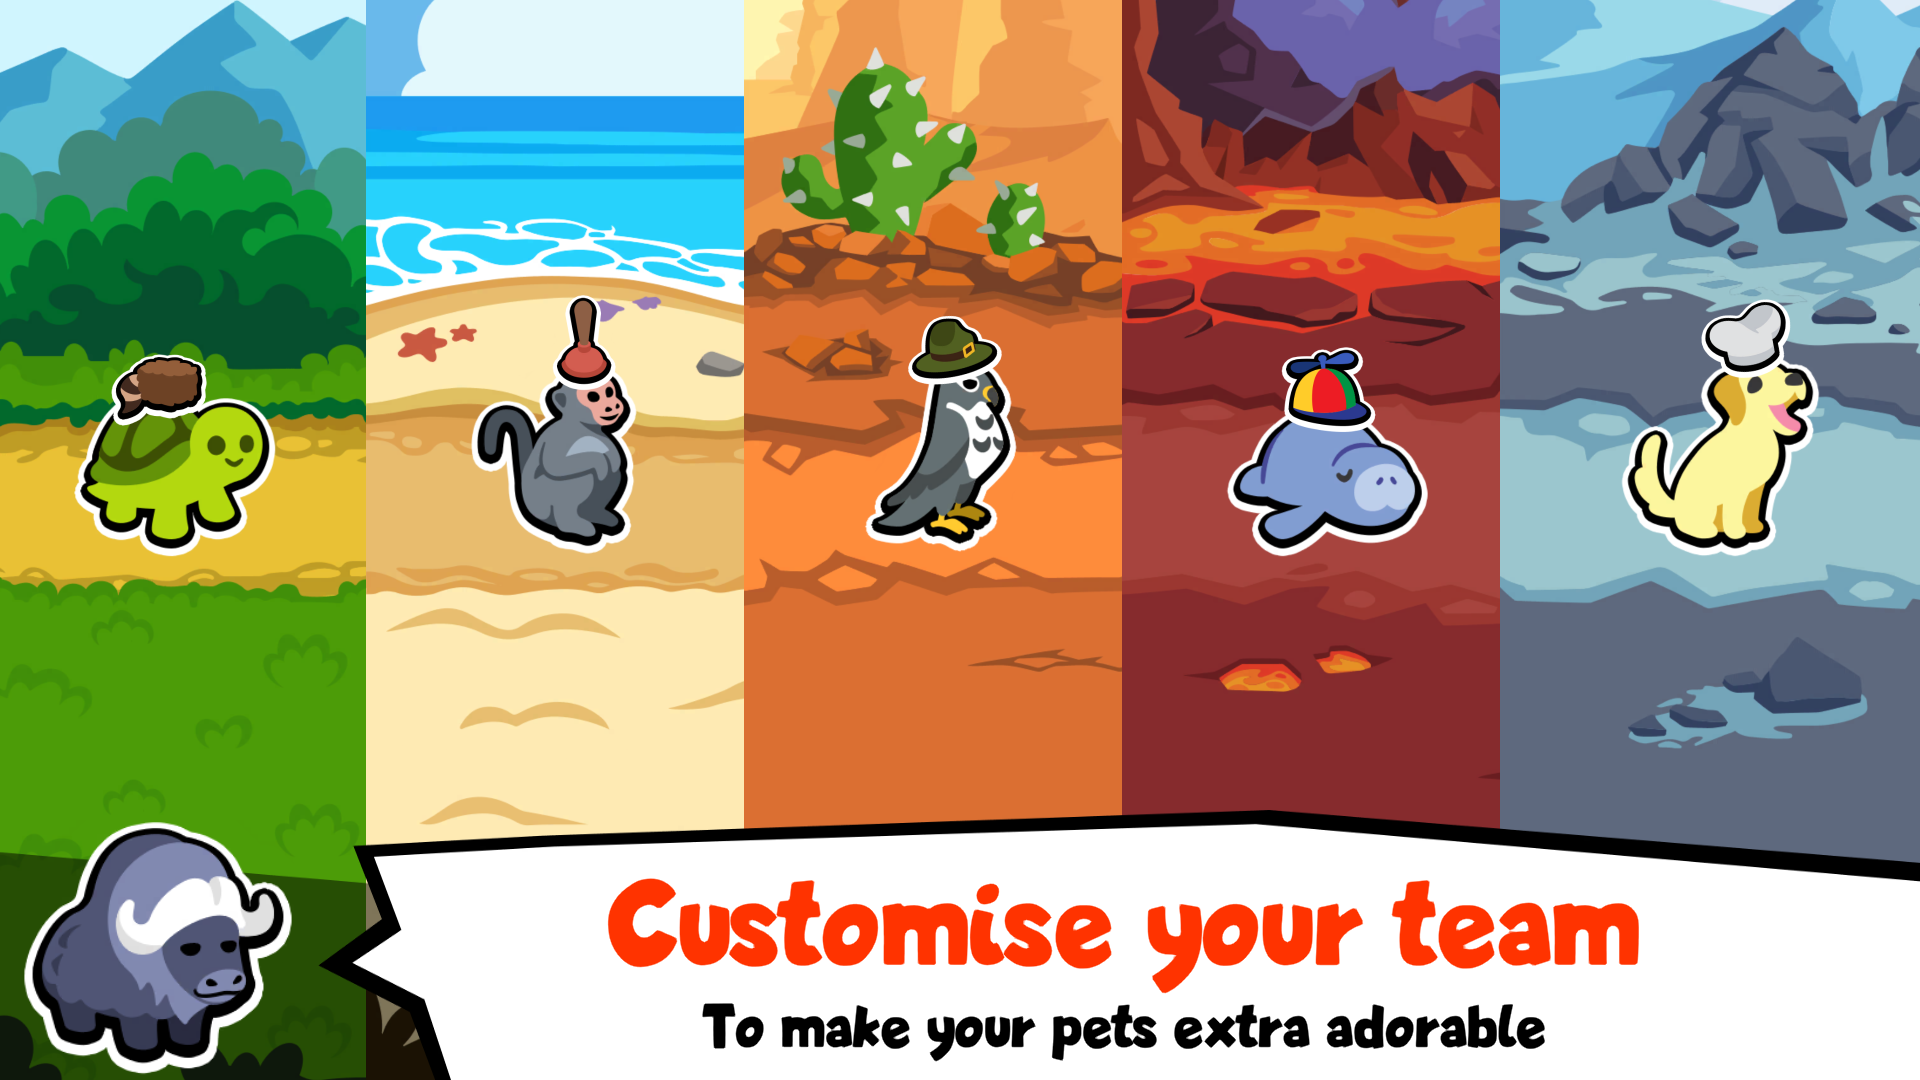 Customise your team - To make your pets extra adorable